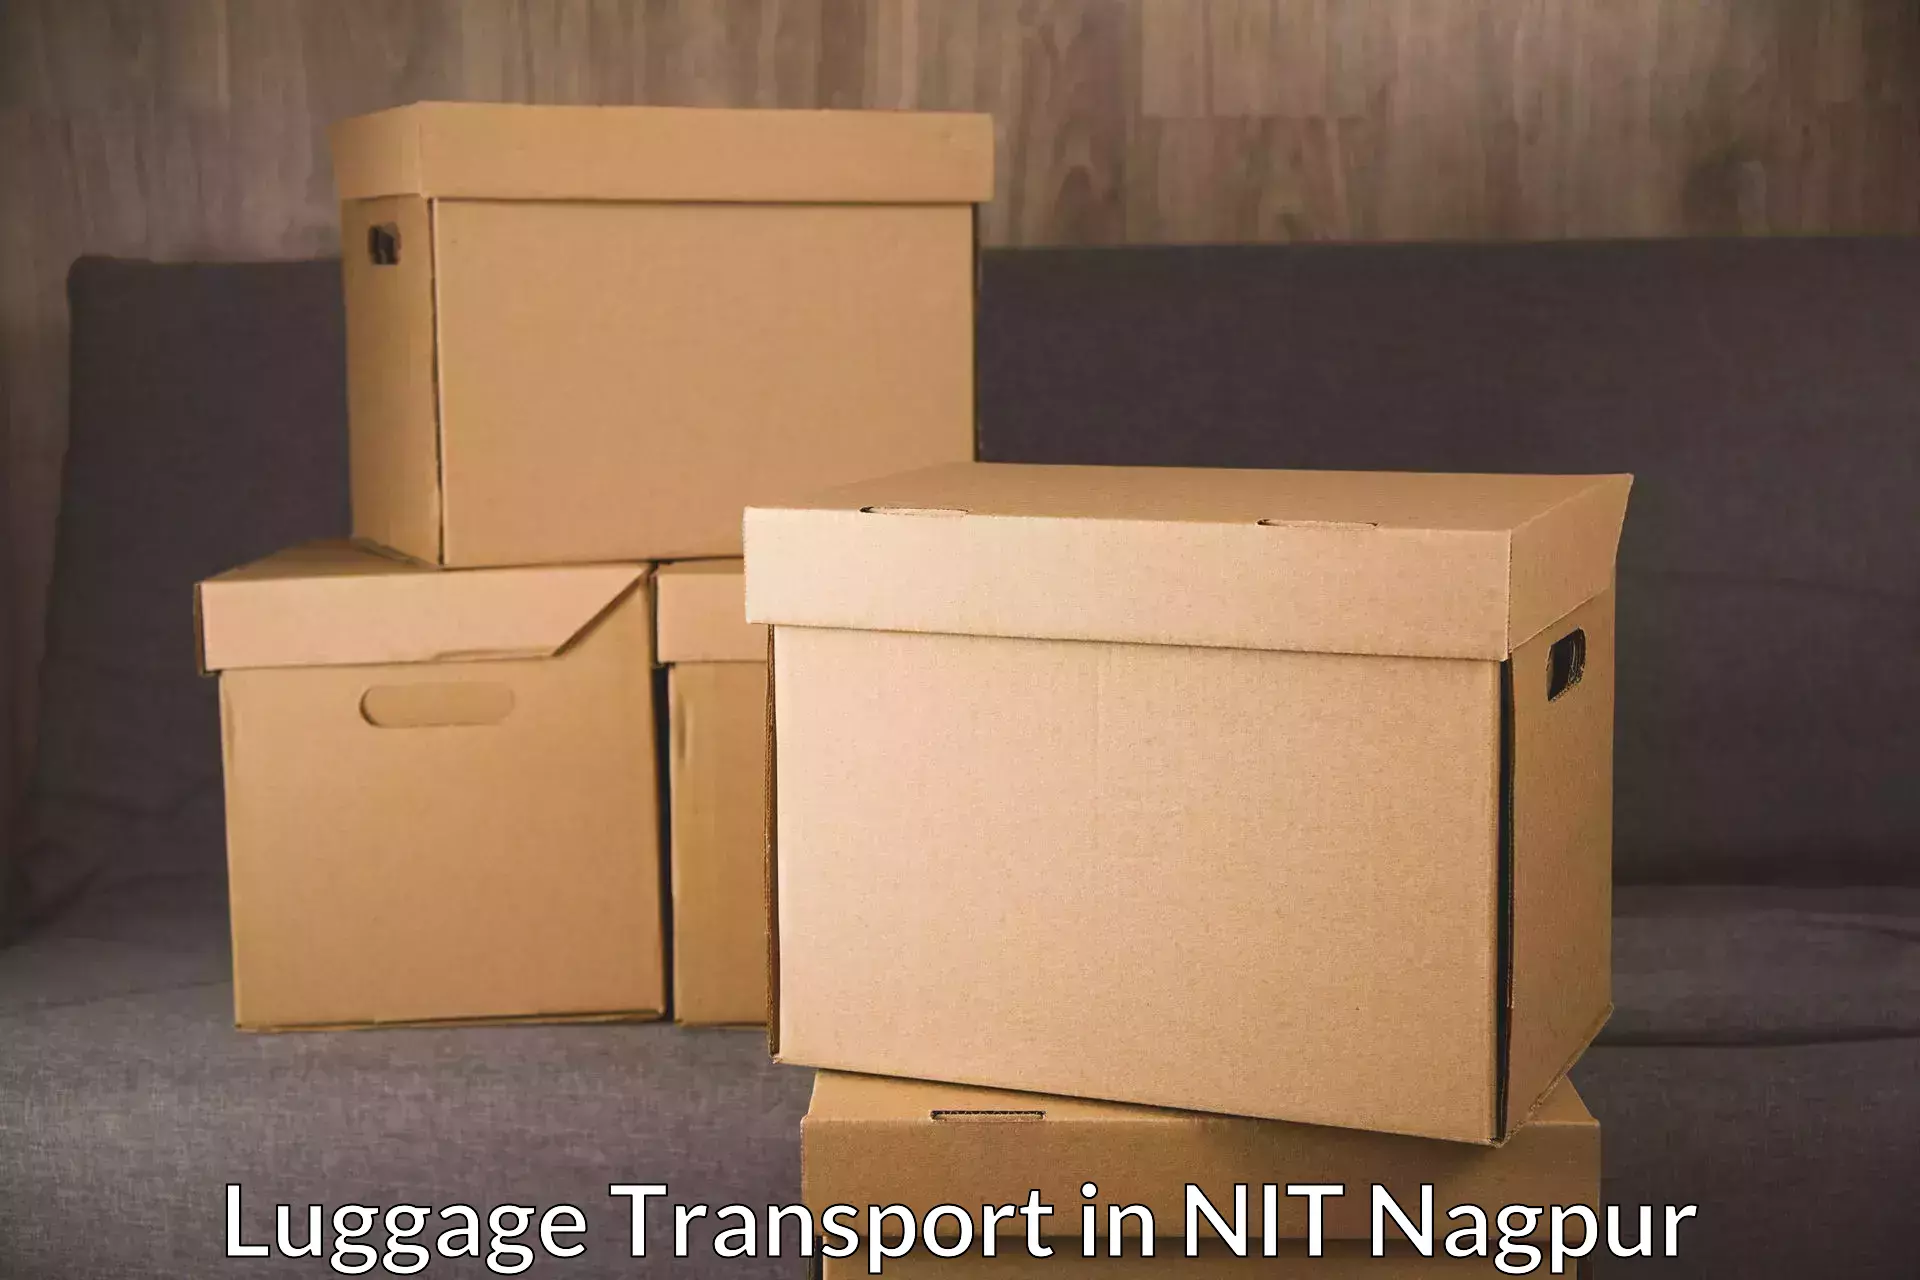 Customized luggage delivery in NIT Nagpur